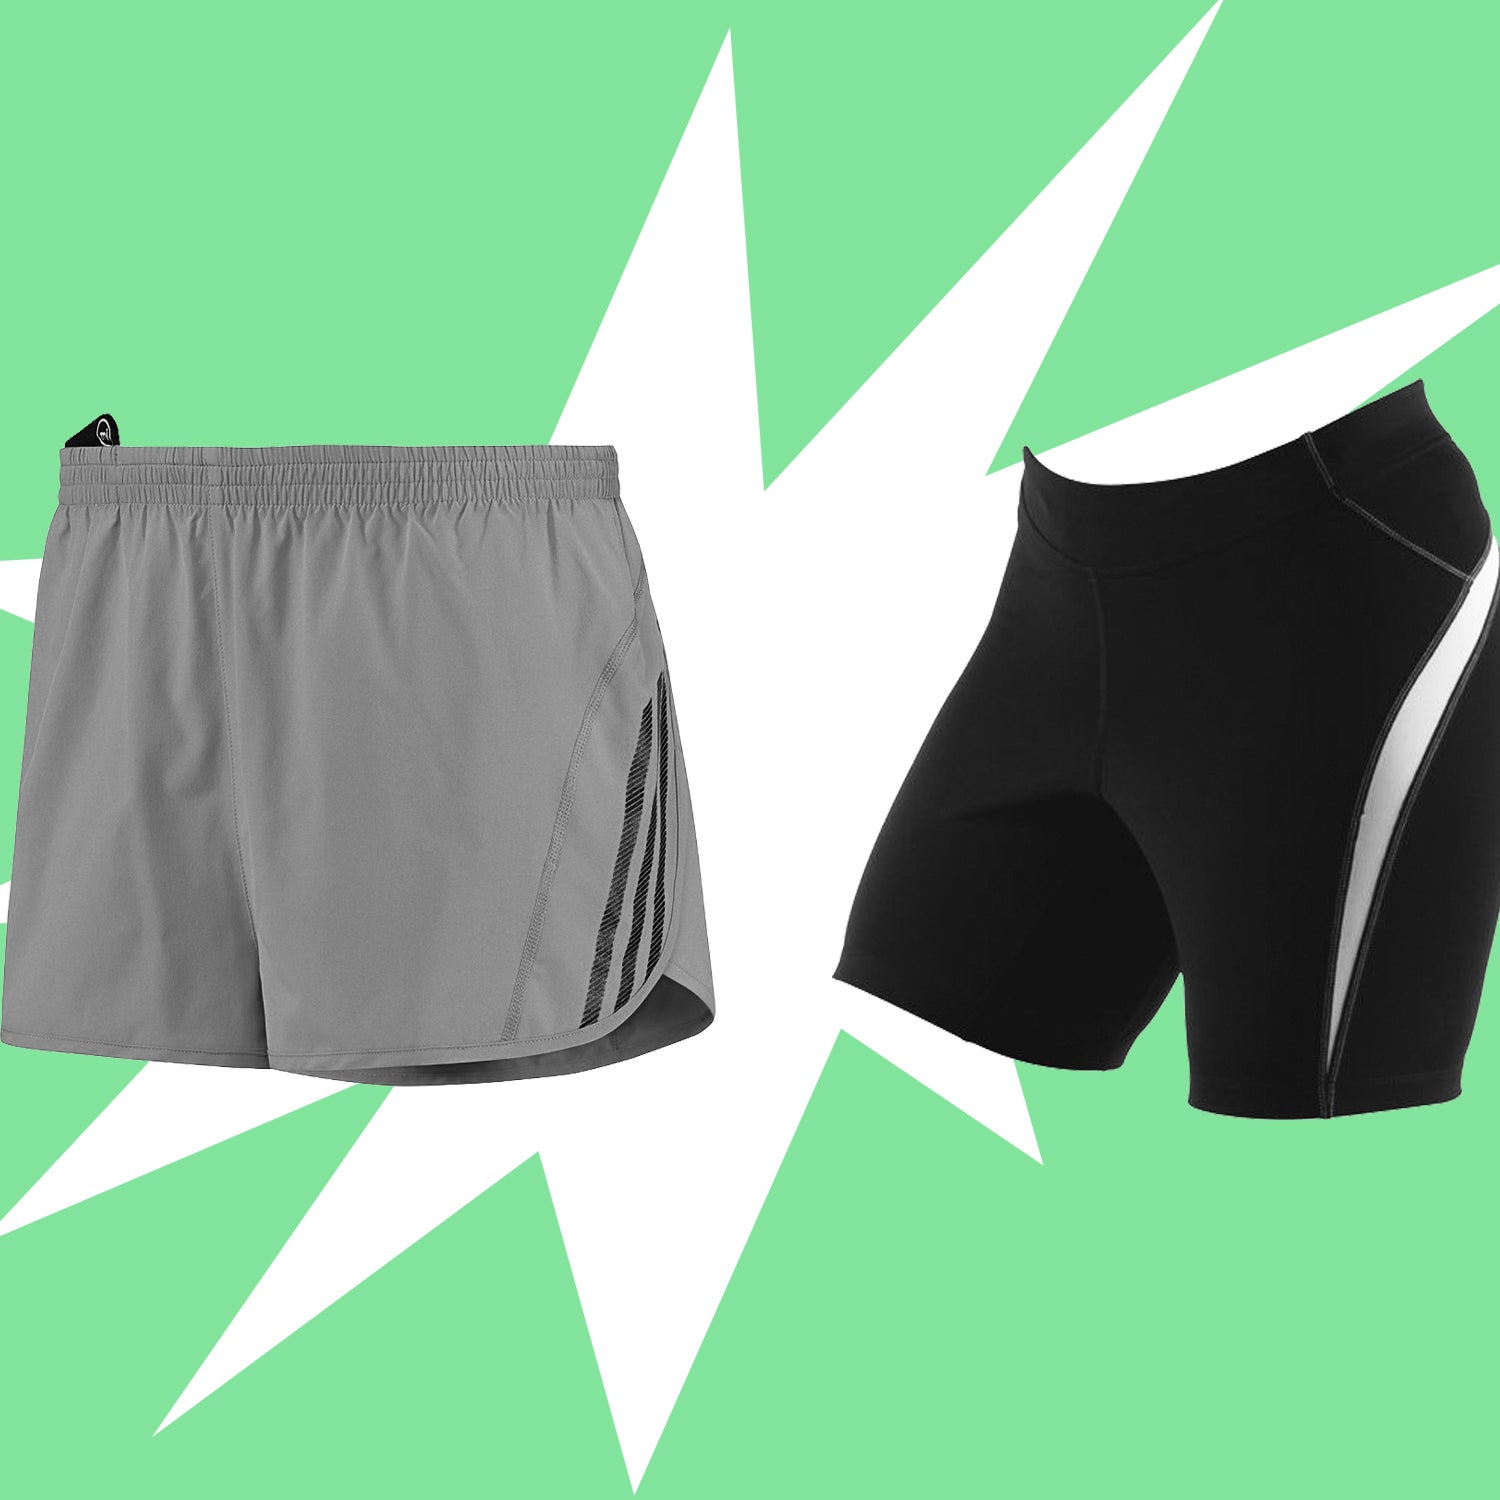 Women's Compression Shorts and Tights